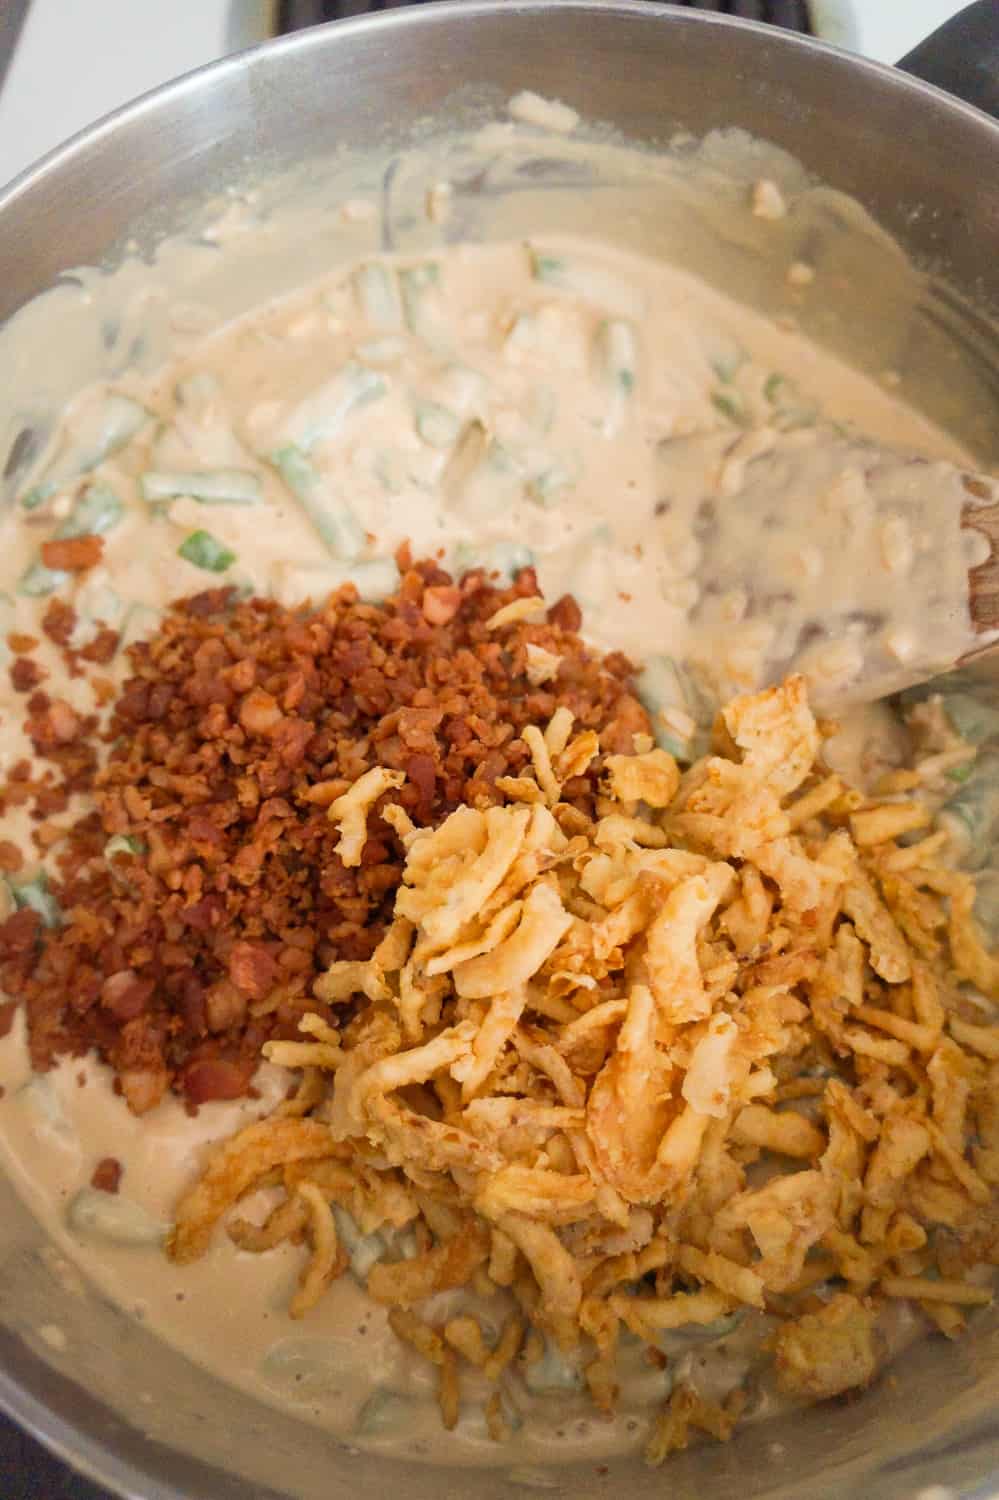 fried onions and real bacon bits added to green bean and cream cheese mixture